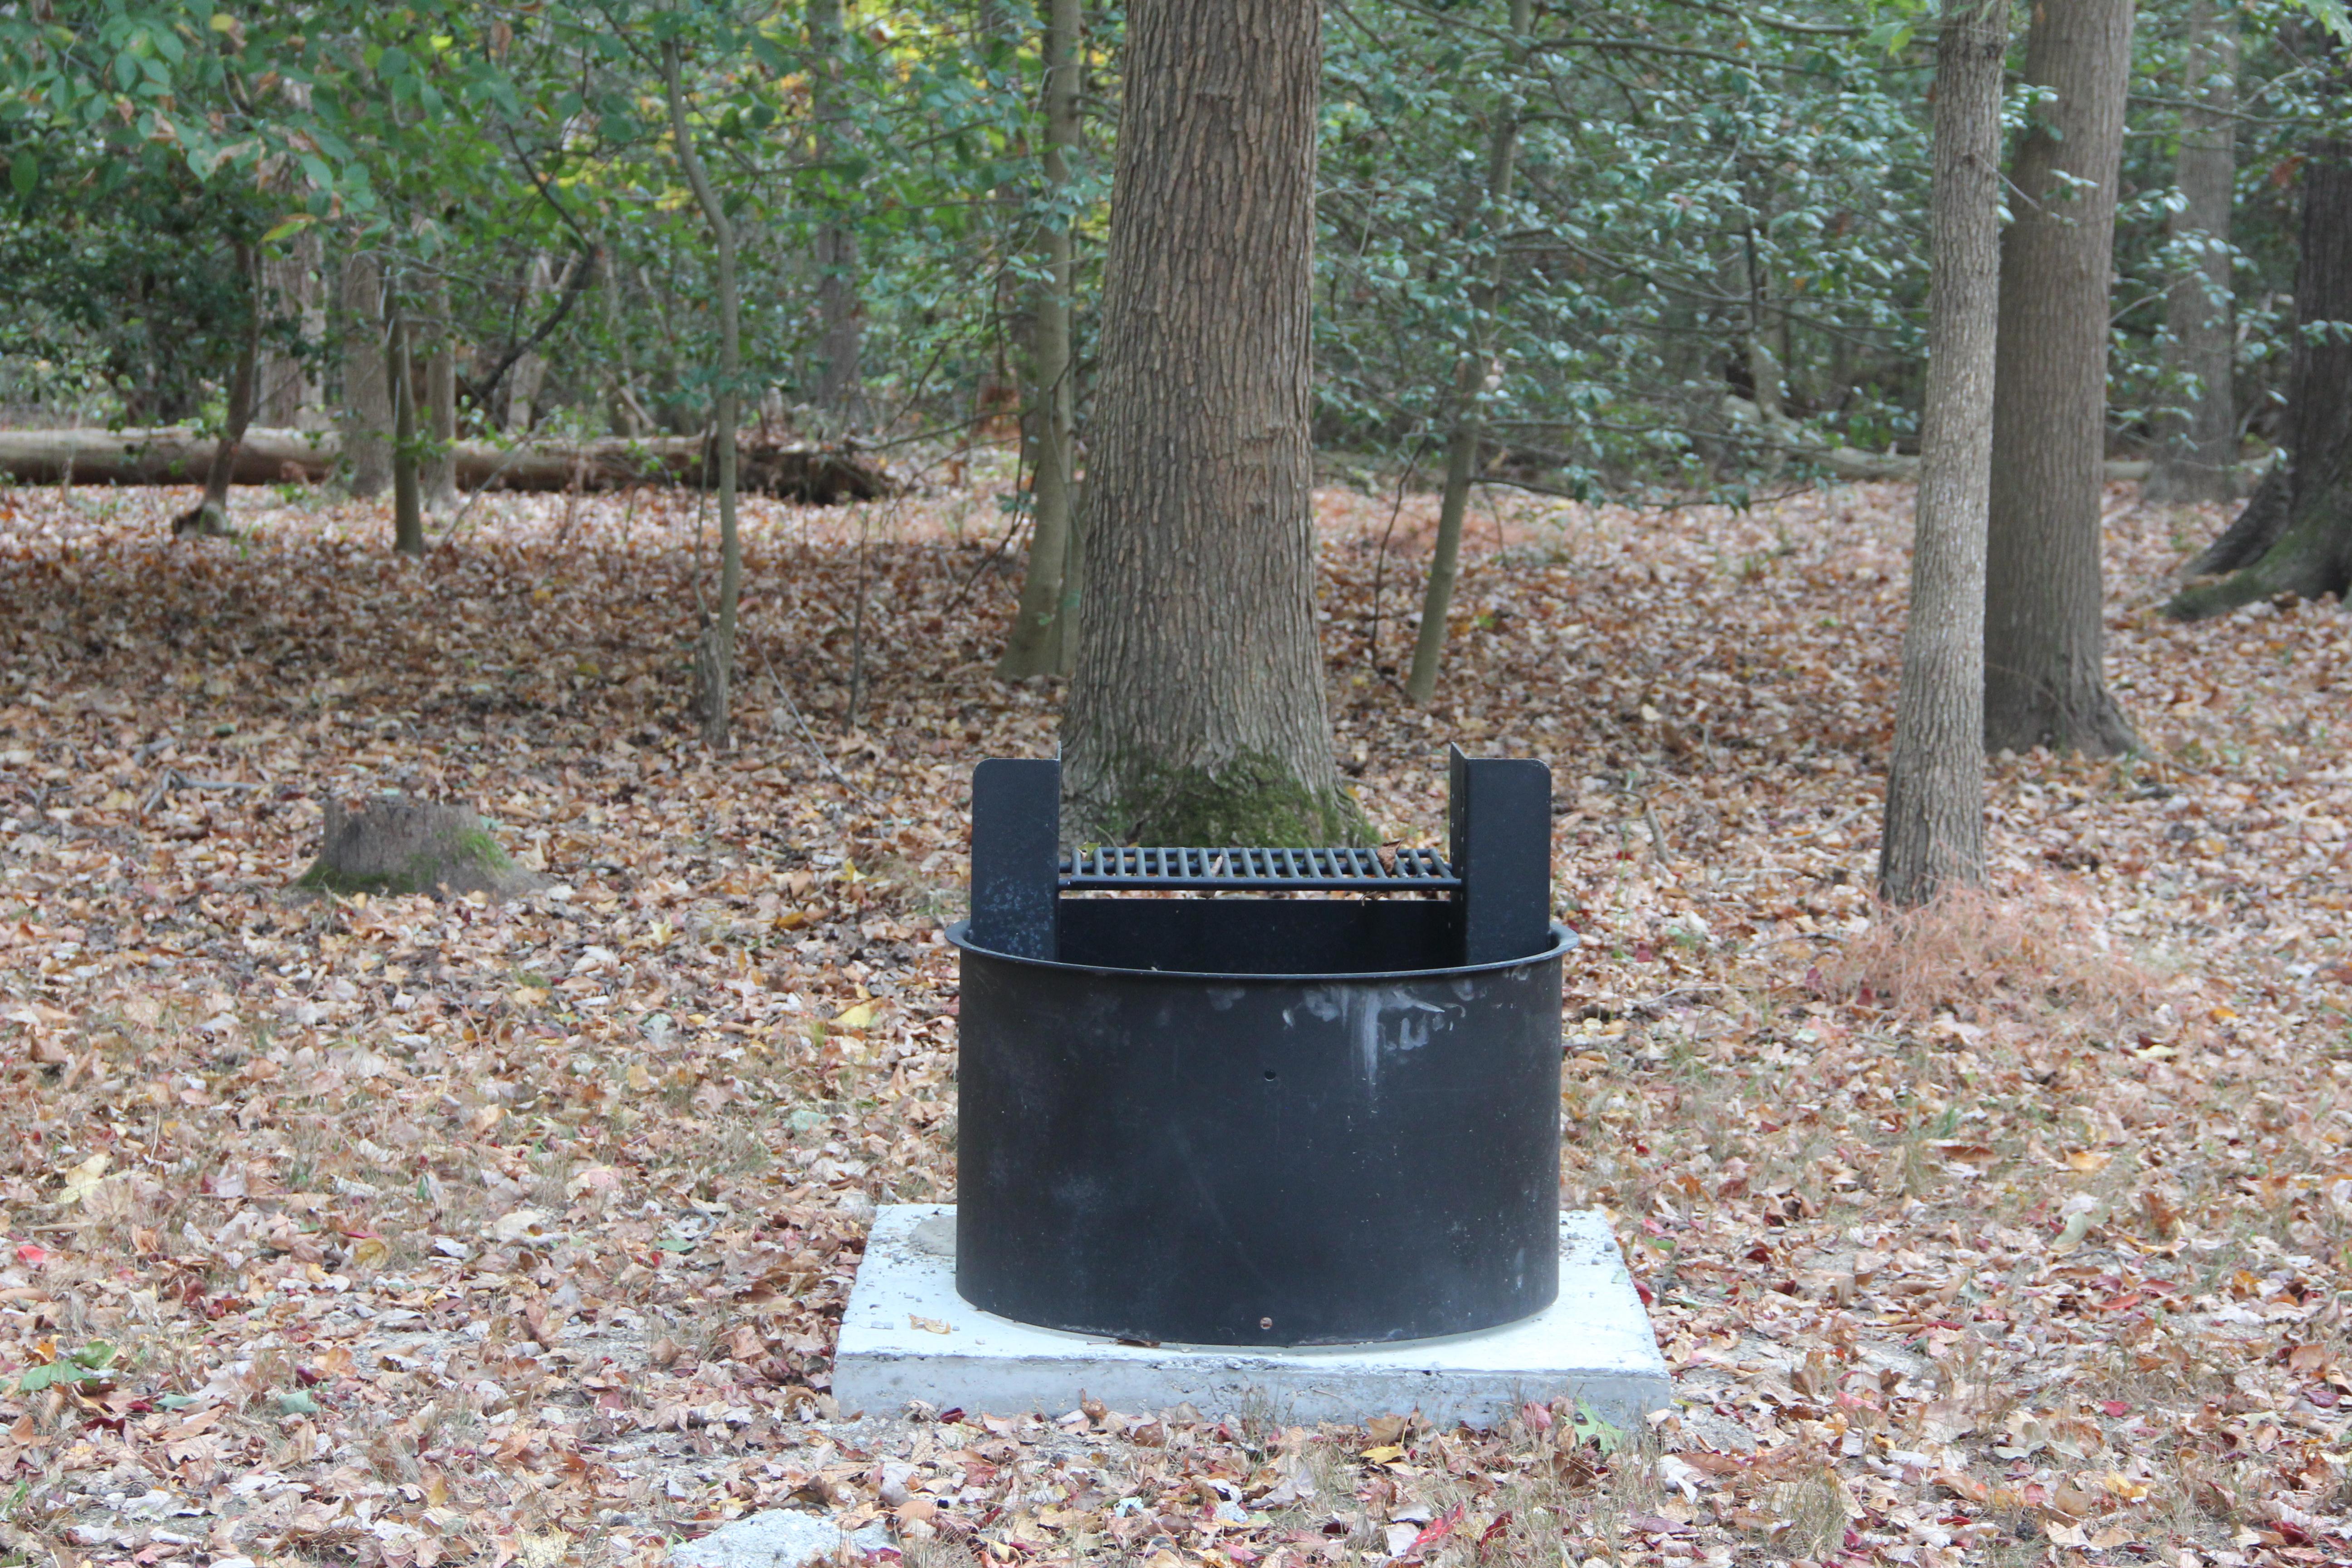 a round back grill with grill on top on a campsite in the Greenbelt Park campground